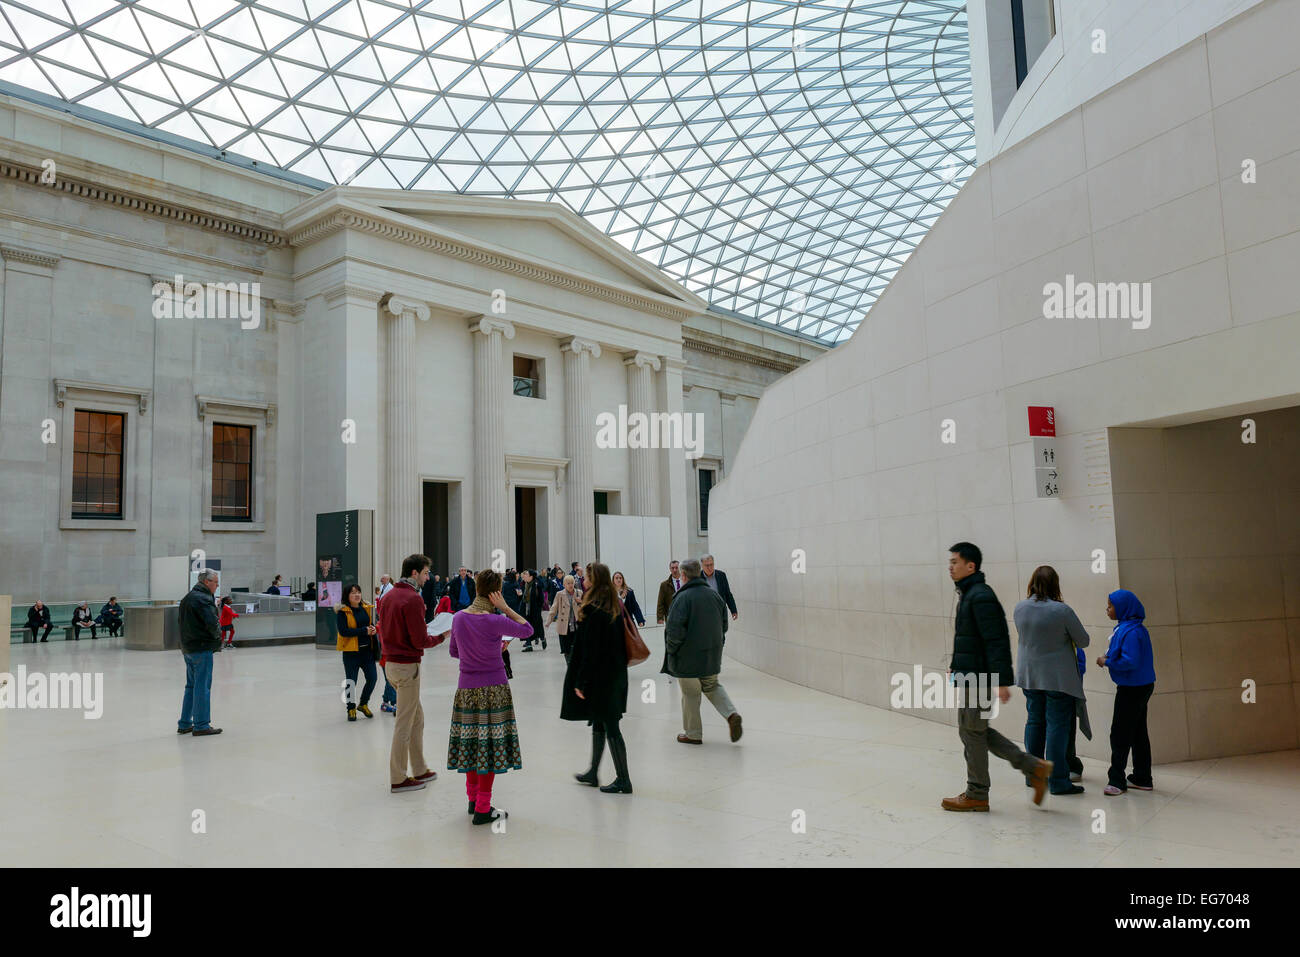 A British tourist attraction - Visitors to London's British Museum milling around in the Great Court. Stock Photo